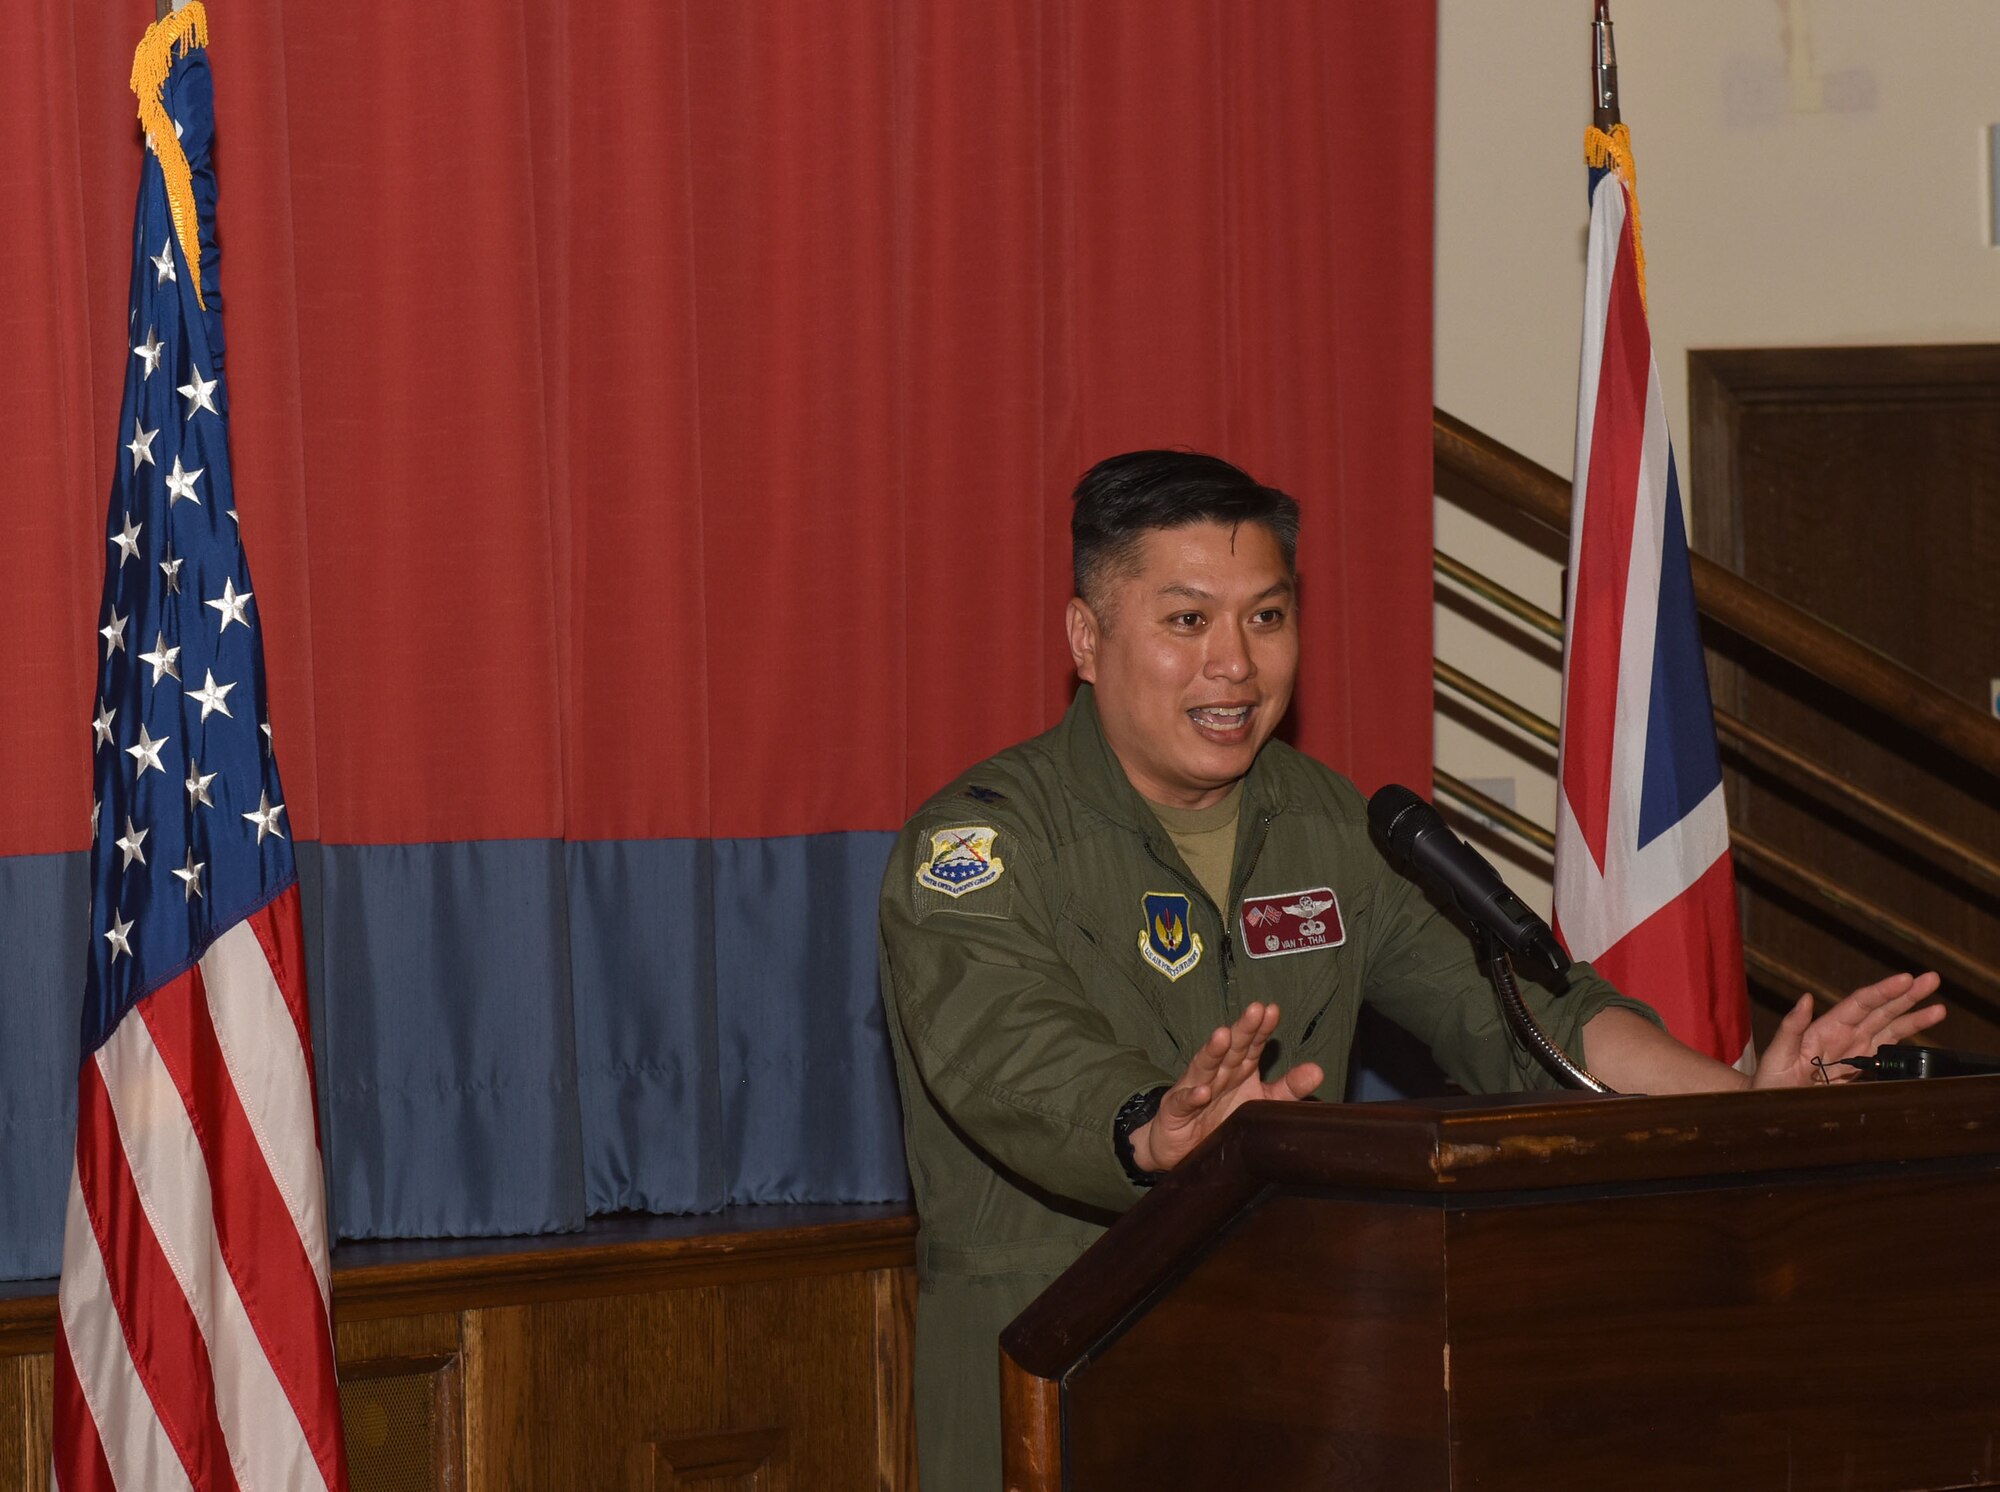 U.S. Air Force Col. Van Thai, 100th Operations Group commander, gives closing remarks at the European Tanker Symposium May 20, 2021, at Royal Air Force Mildenhall, England. NATO allies from countries including Finland, France, Germany and Hungary attended virtually to discuss the future of European interoperability and strengthen alliances by sharing experiences and knowledge. (U.S. Air Force photo by Karen Abeyasekere)